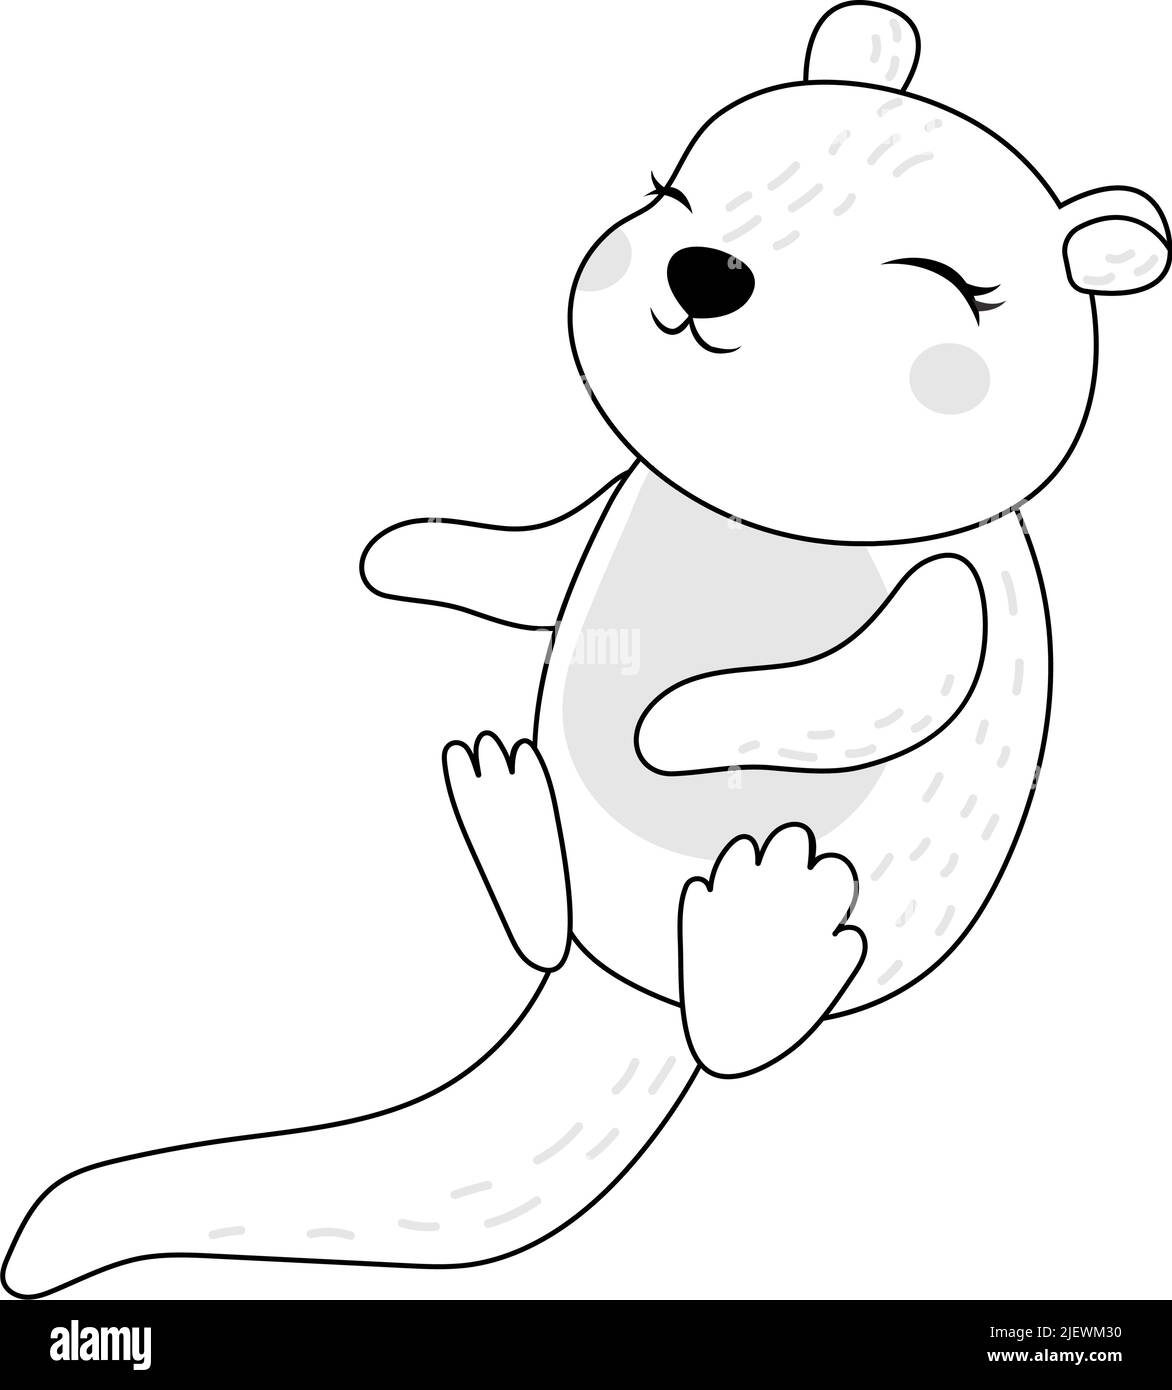 Cute Clipart Otters Black and White Illustration in Cartoon Style. Cartoon Clip Art Sea Otter Coloring Page. Vector Illustration of an Animal for Stock Vector